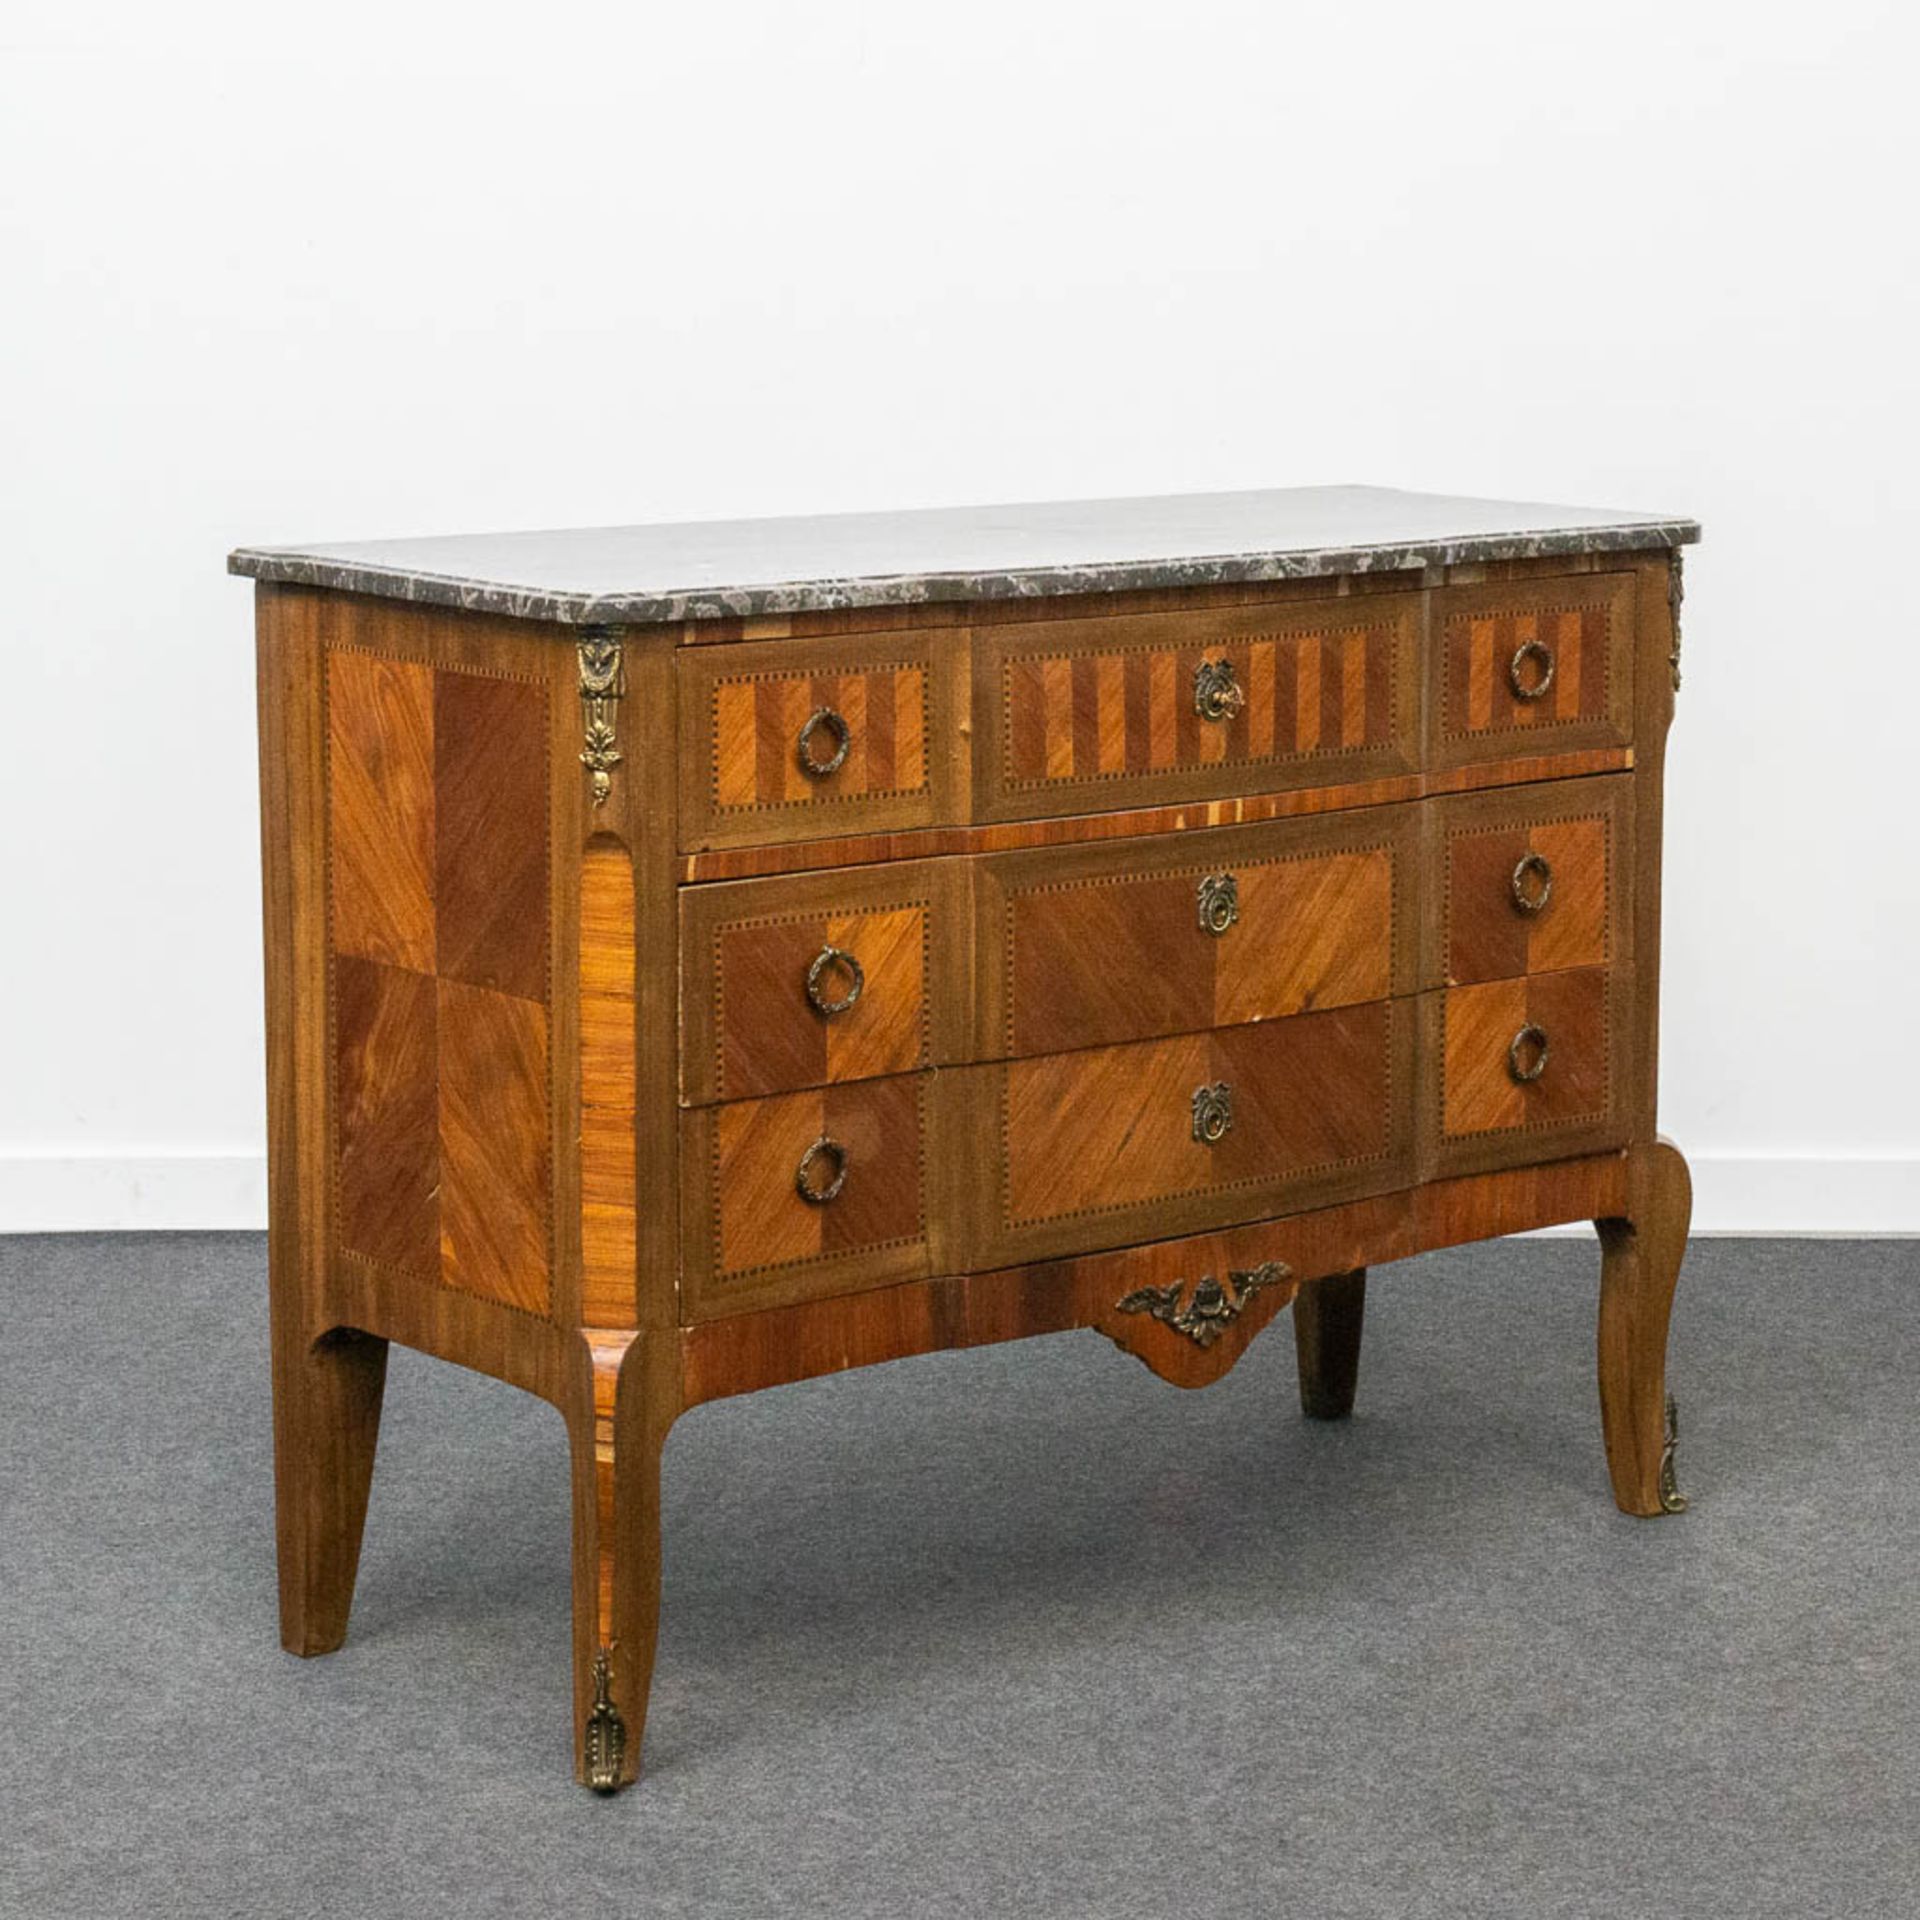 A bronze mounted 3-drawer commode with marble top.